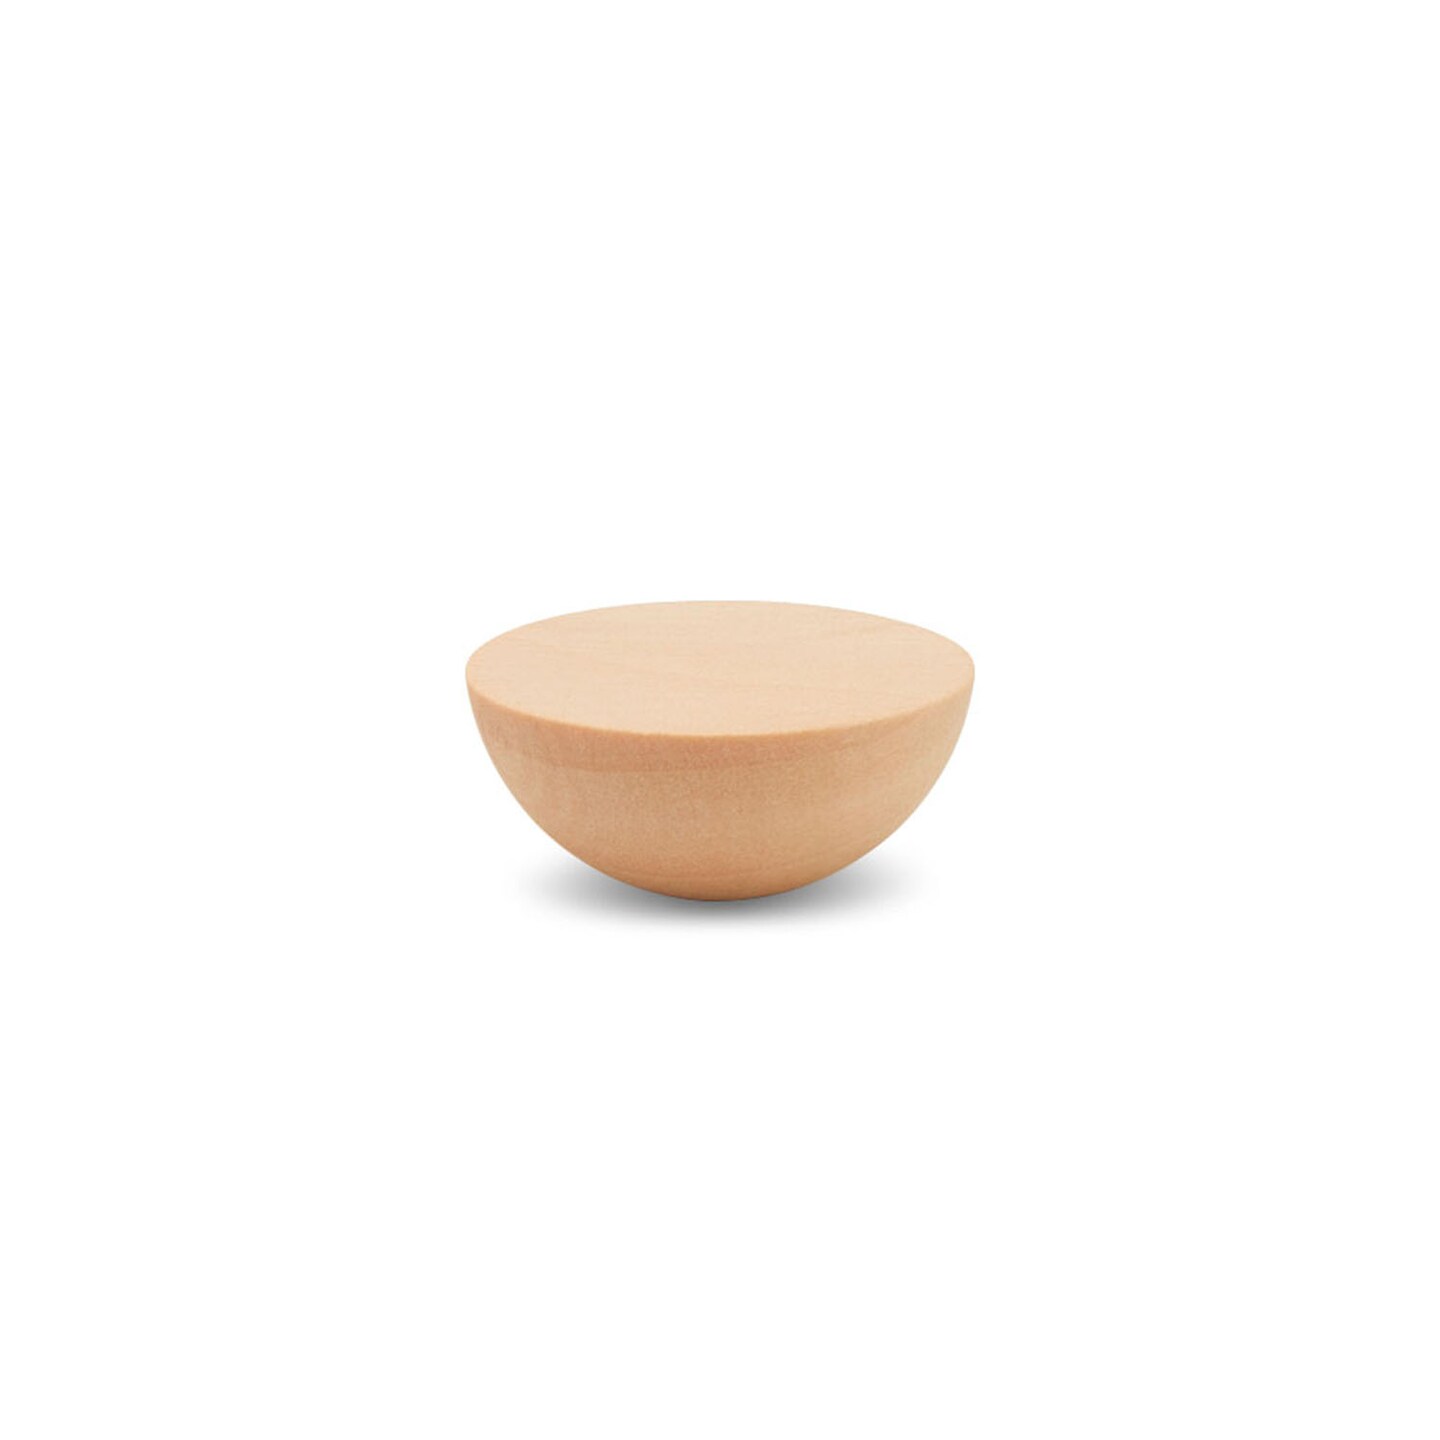 Wooden Split Balls, Multiple Sizes Available, Half Balls for Crafting and DIY D&#xE9;cor |Woodpeckers